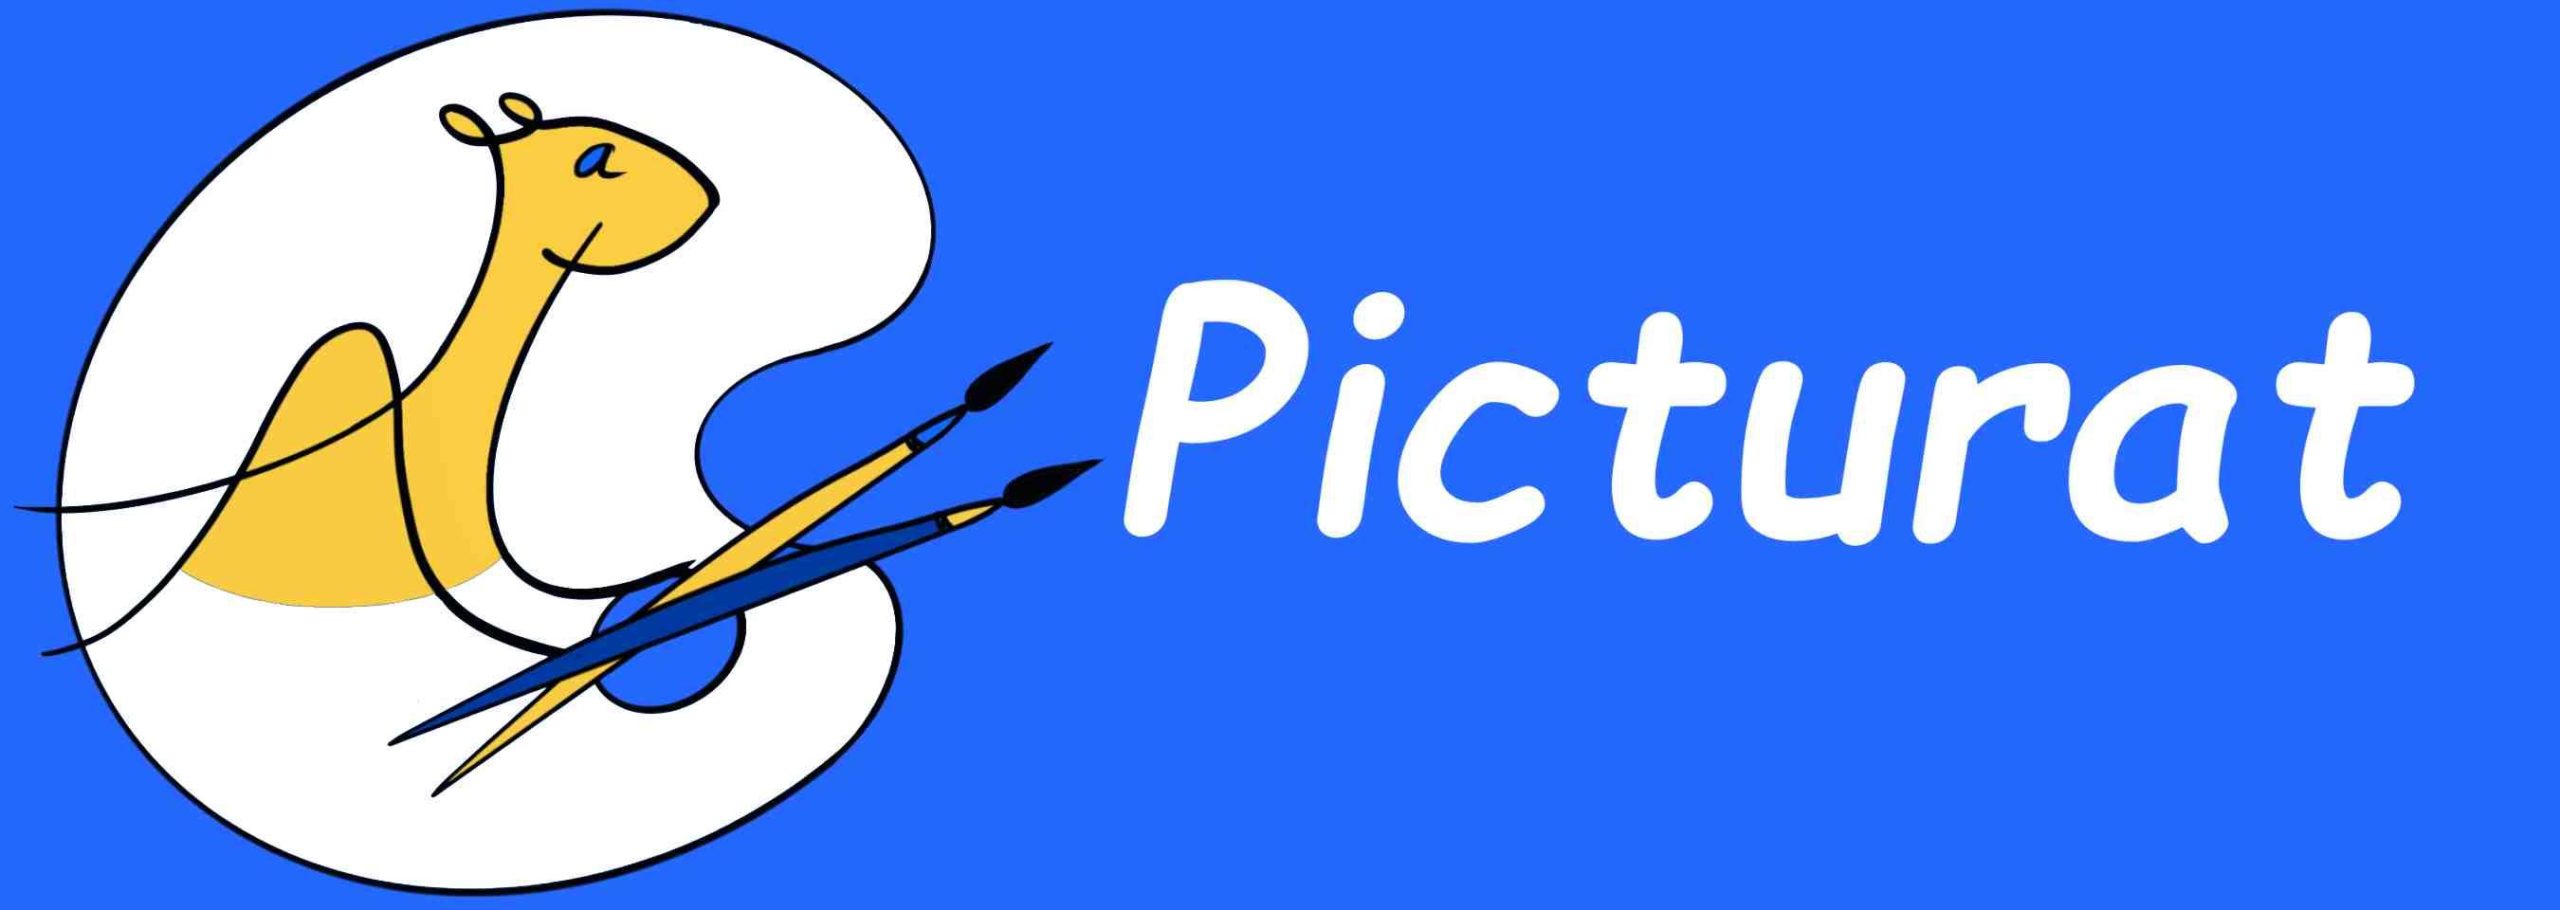 Picturat logo for cartoons and drawings